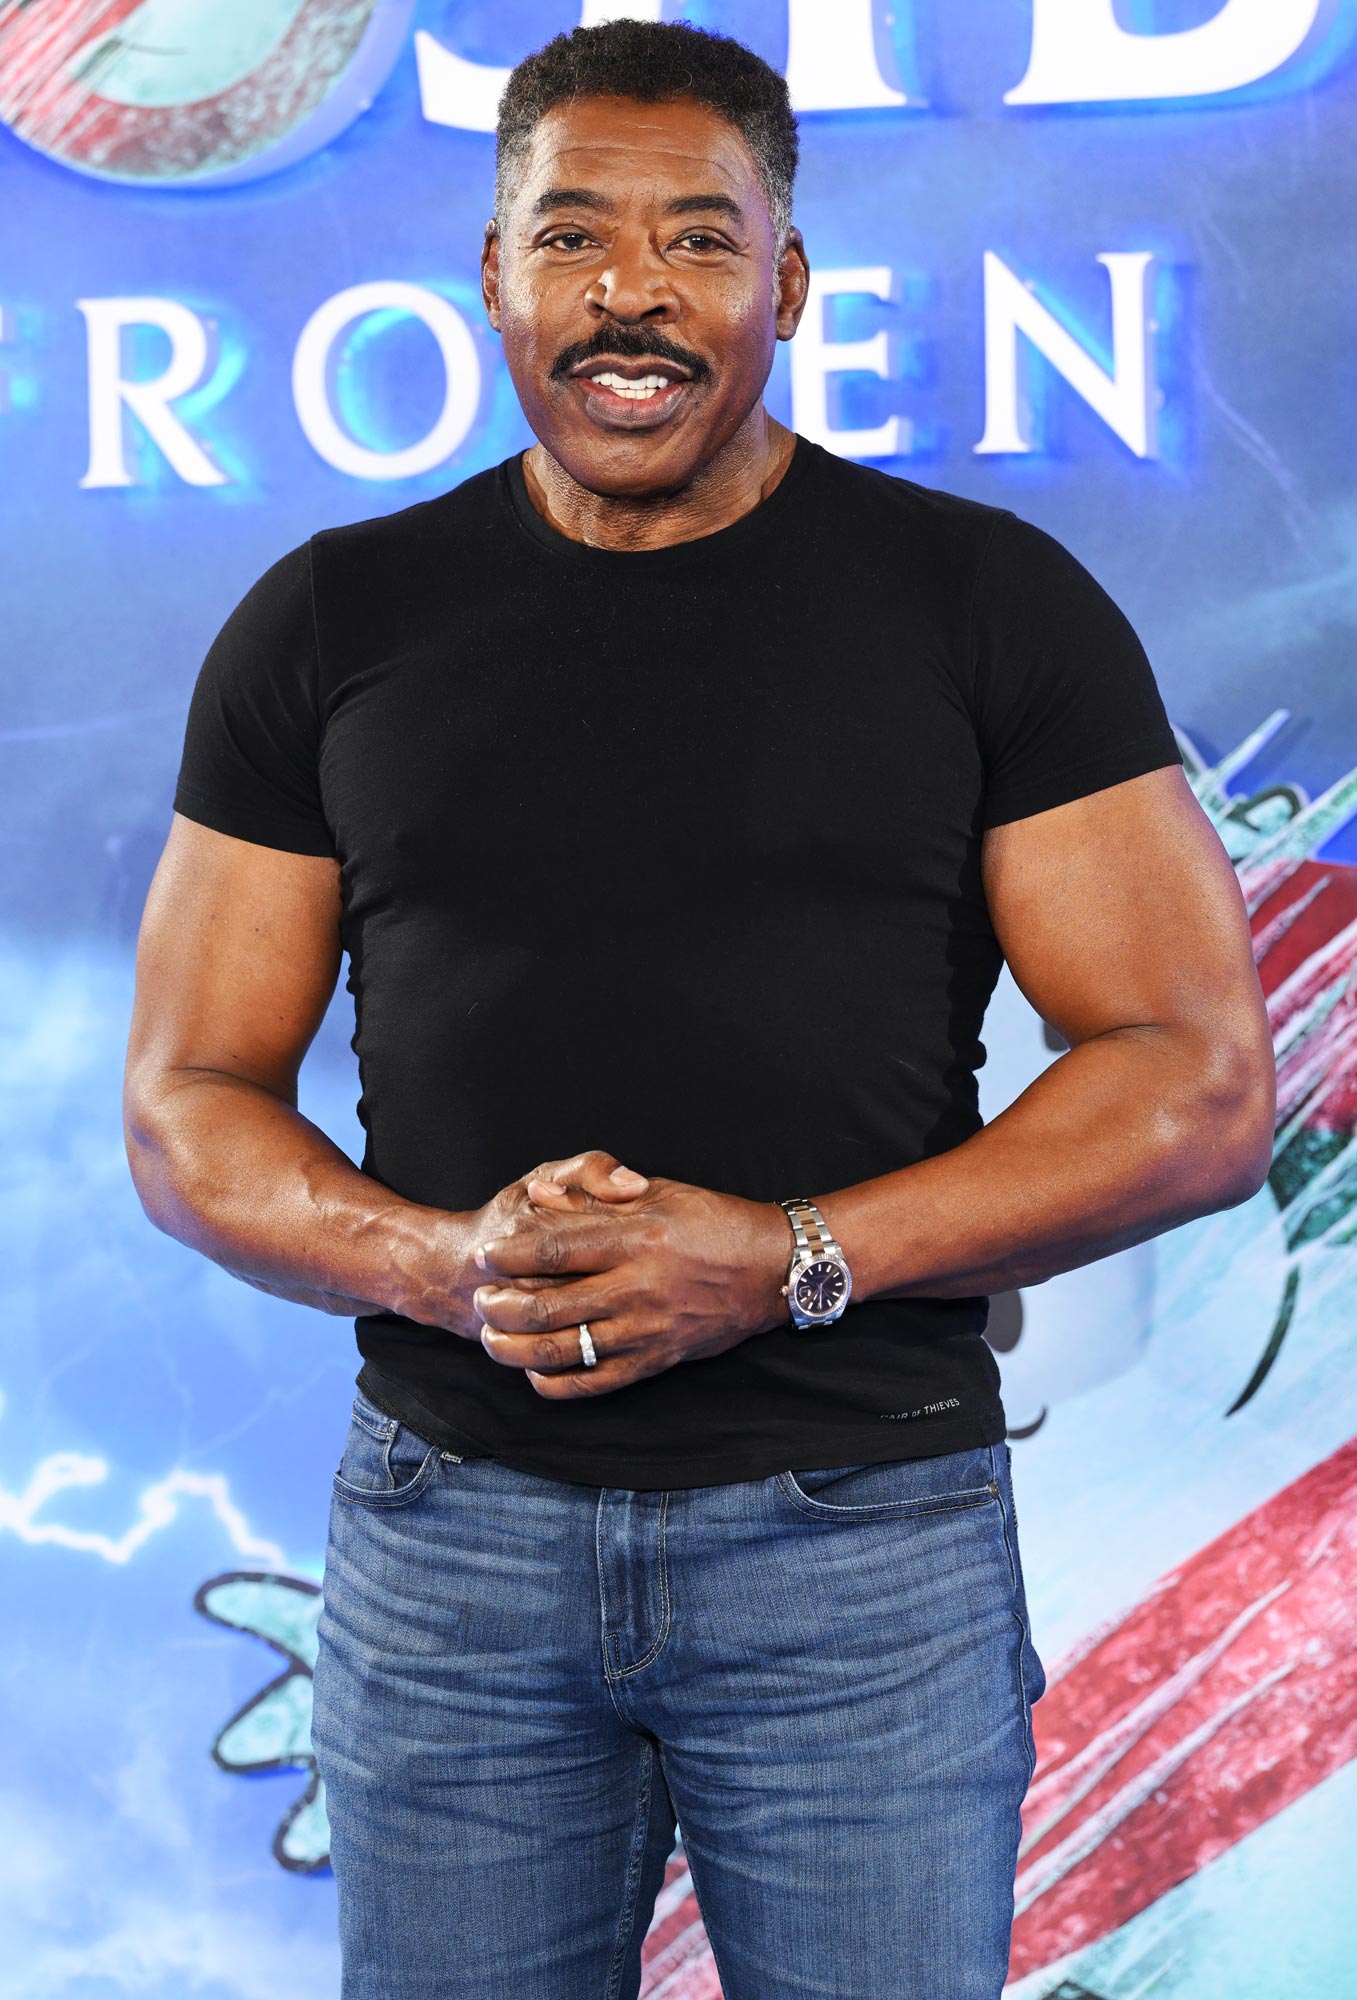 feature-Ernie-Hudson-Explains-Why-He-Constantly-Has-to-Work-Job-to-Job-After-60-Years-of-Acting.jpg